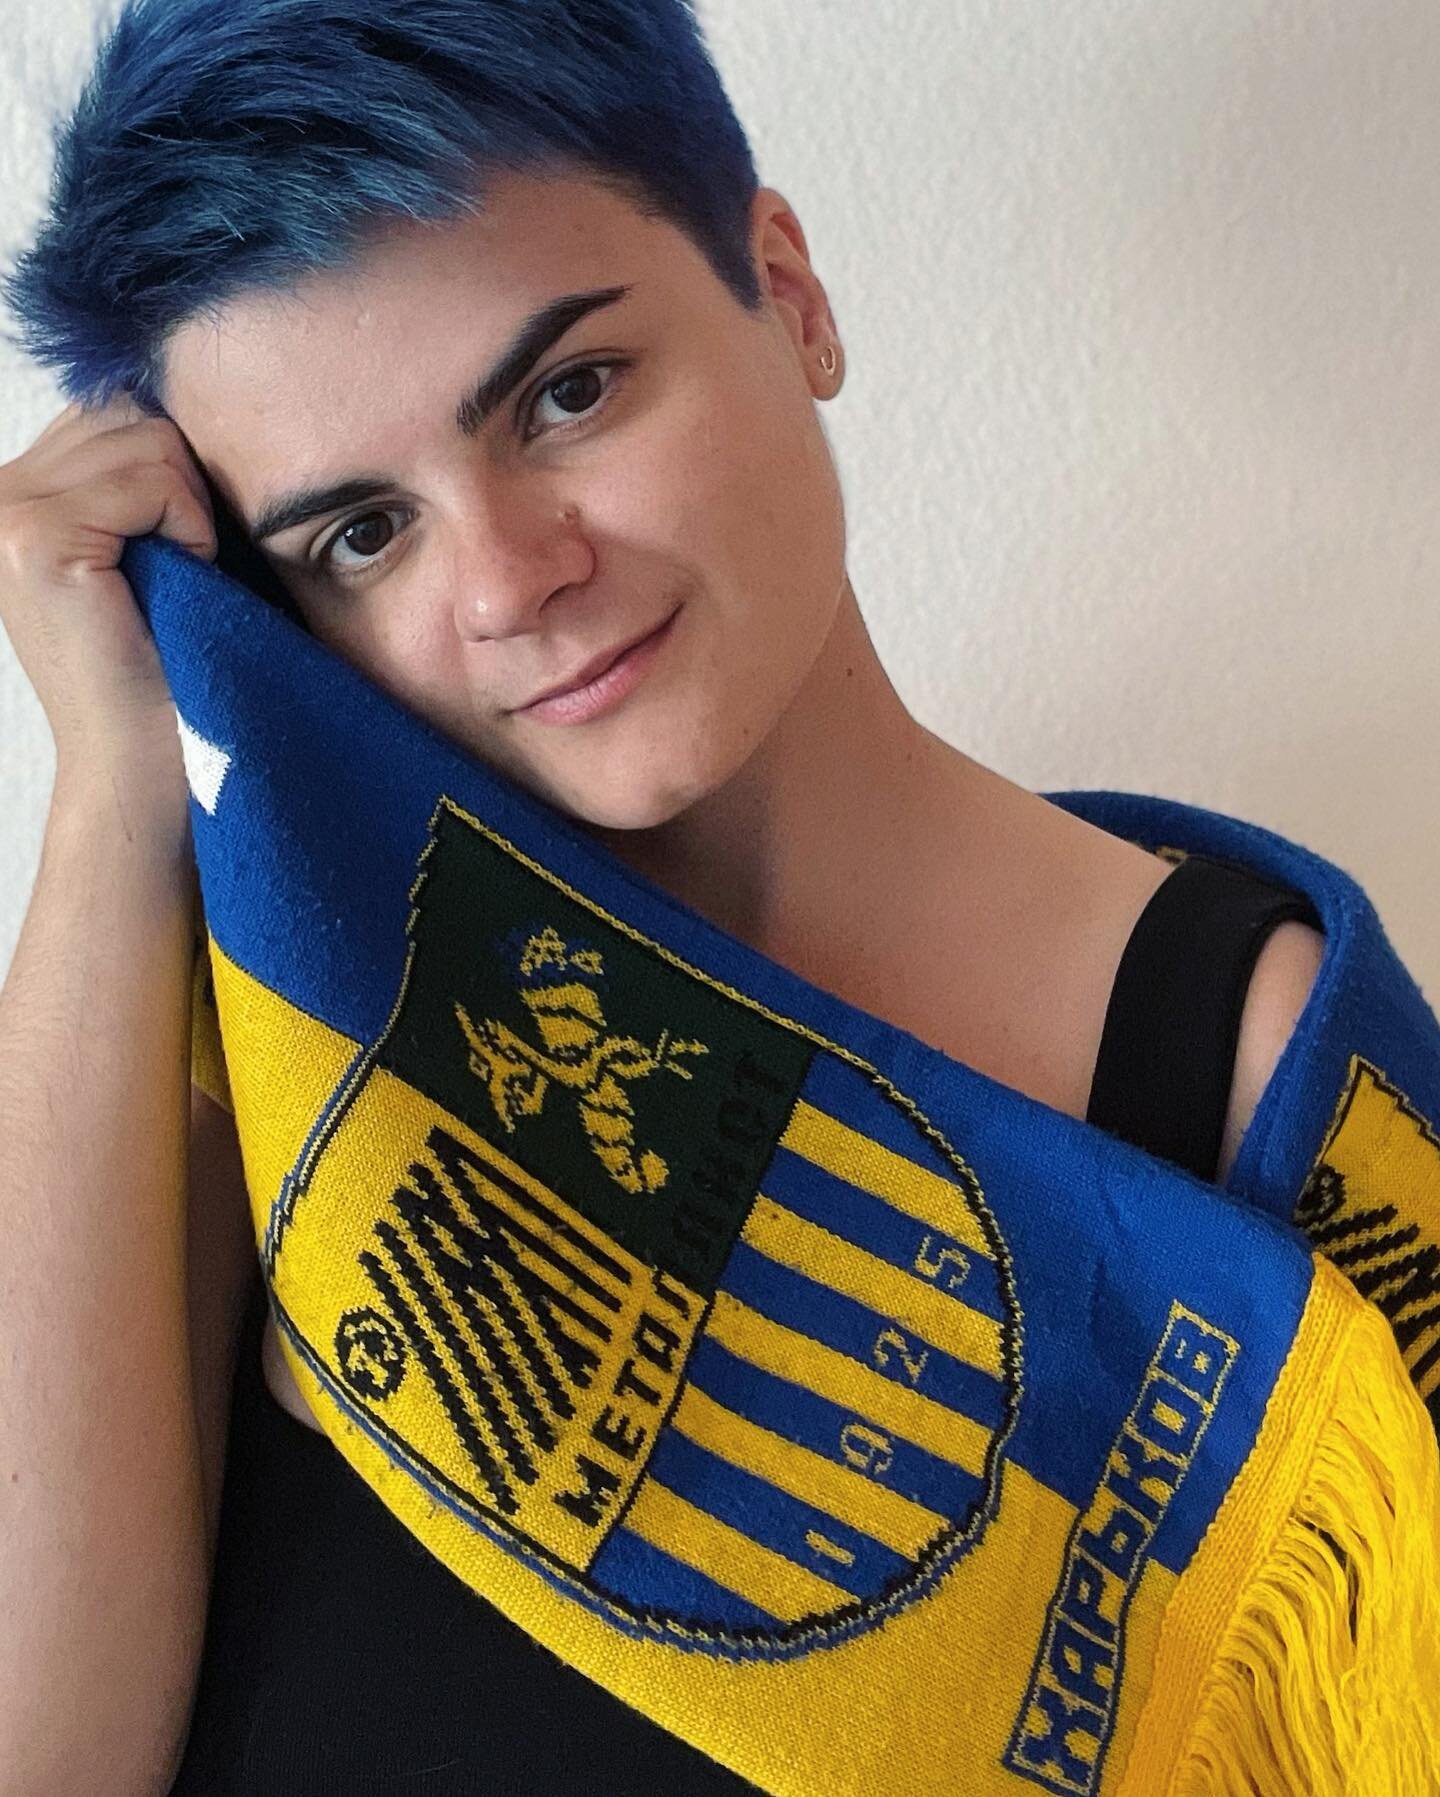 I was sent something really precious from home. My fan scarf of FC &ldquo;Metalist Kharkiv&rdquo;, it has been with me since 2008, and followed me to every game till 2014. That year, when the war with Russia actually started, my team stopped existing